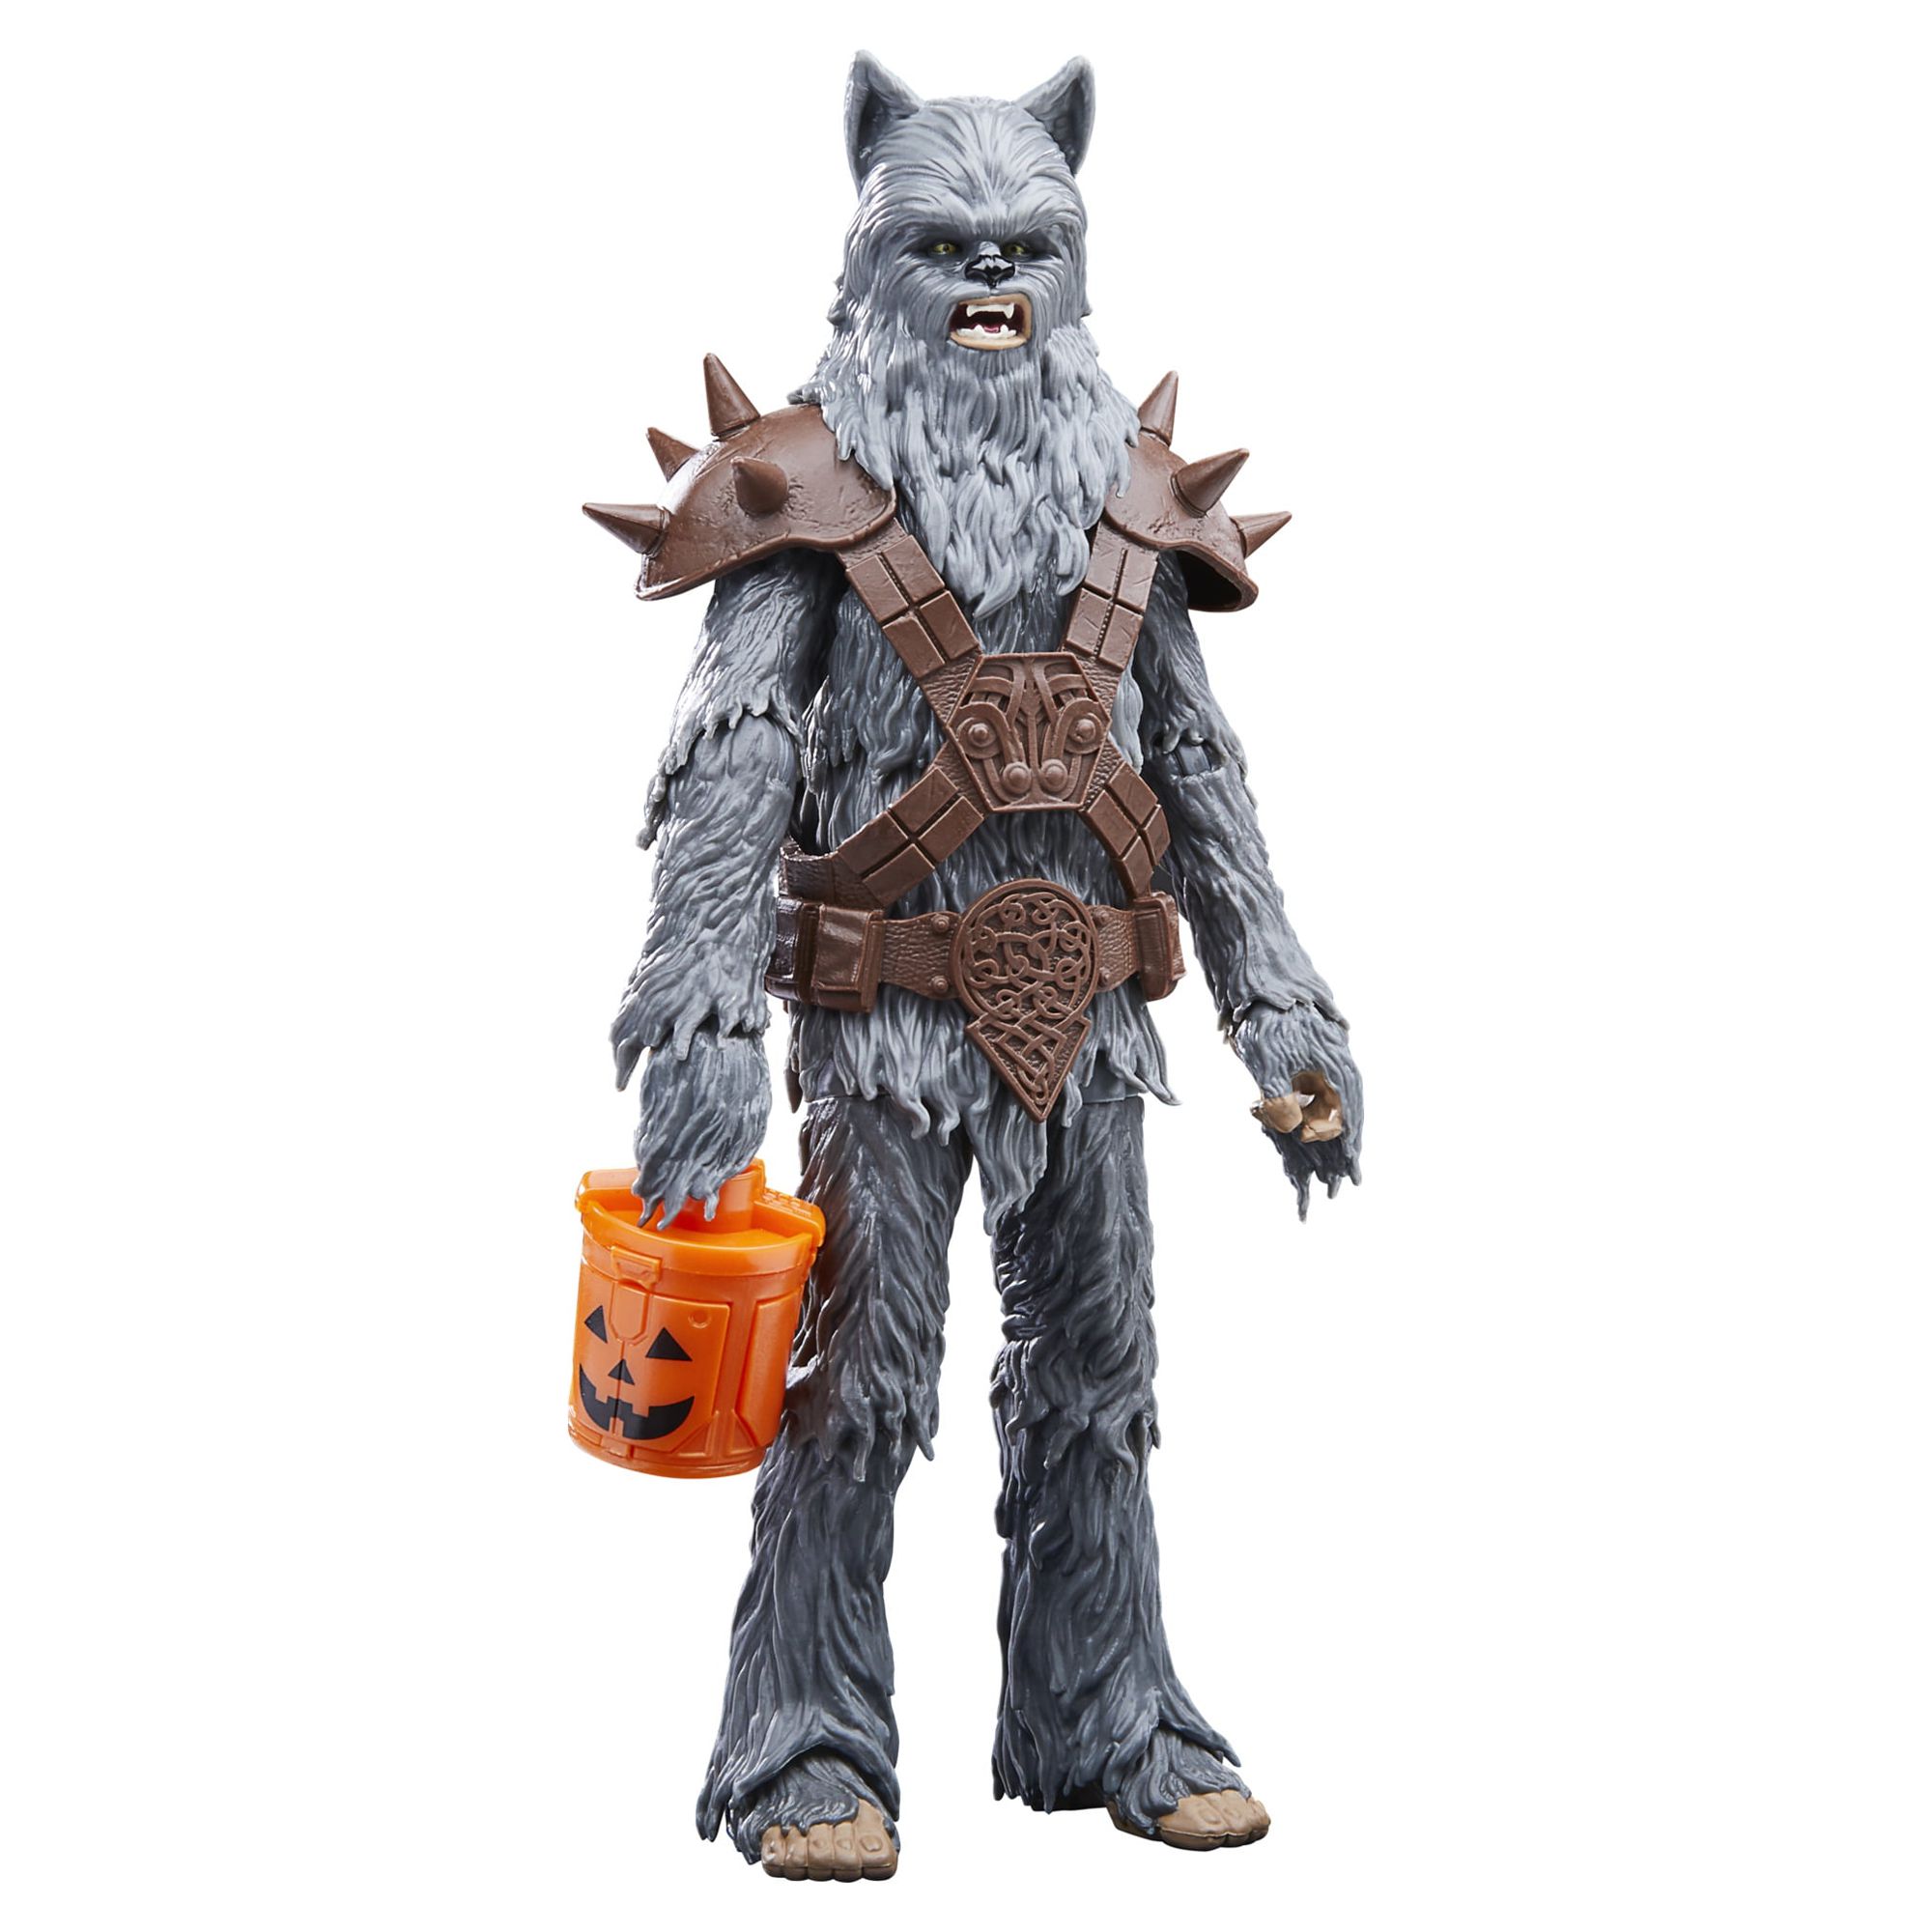 Star Wars: The Black Series Wookiee Halloween Bucket Edition Kids Toy Action Figure for Boys and Girls Ages 4 5 6 7 8 and Up (6”) - image 1 of 7